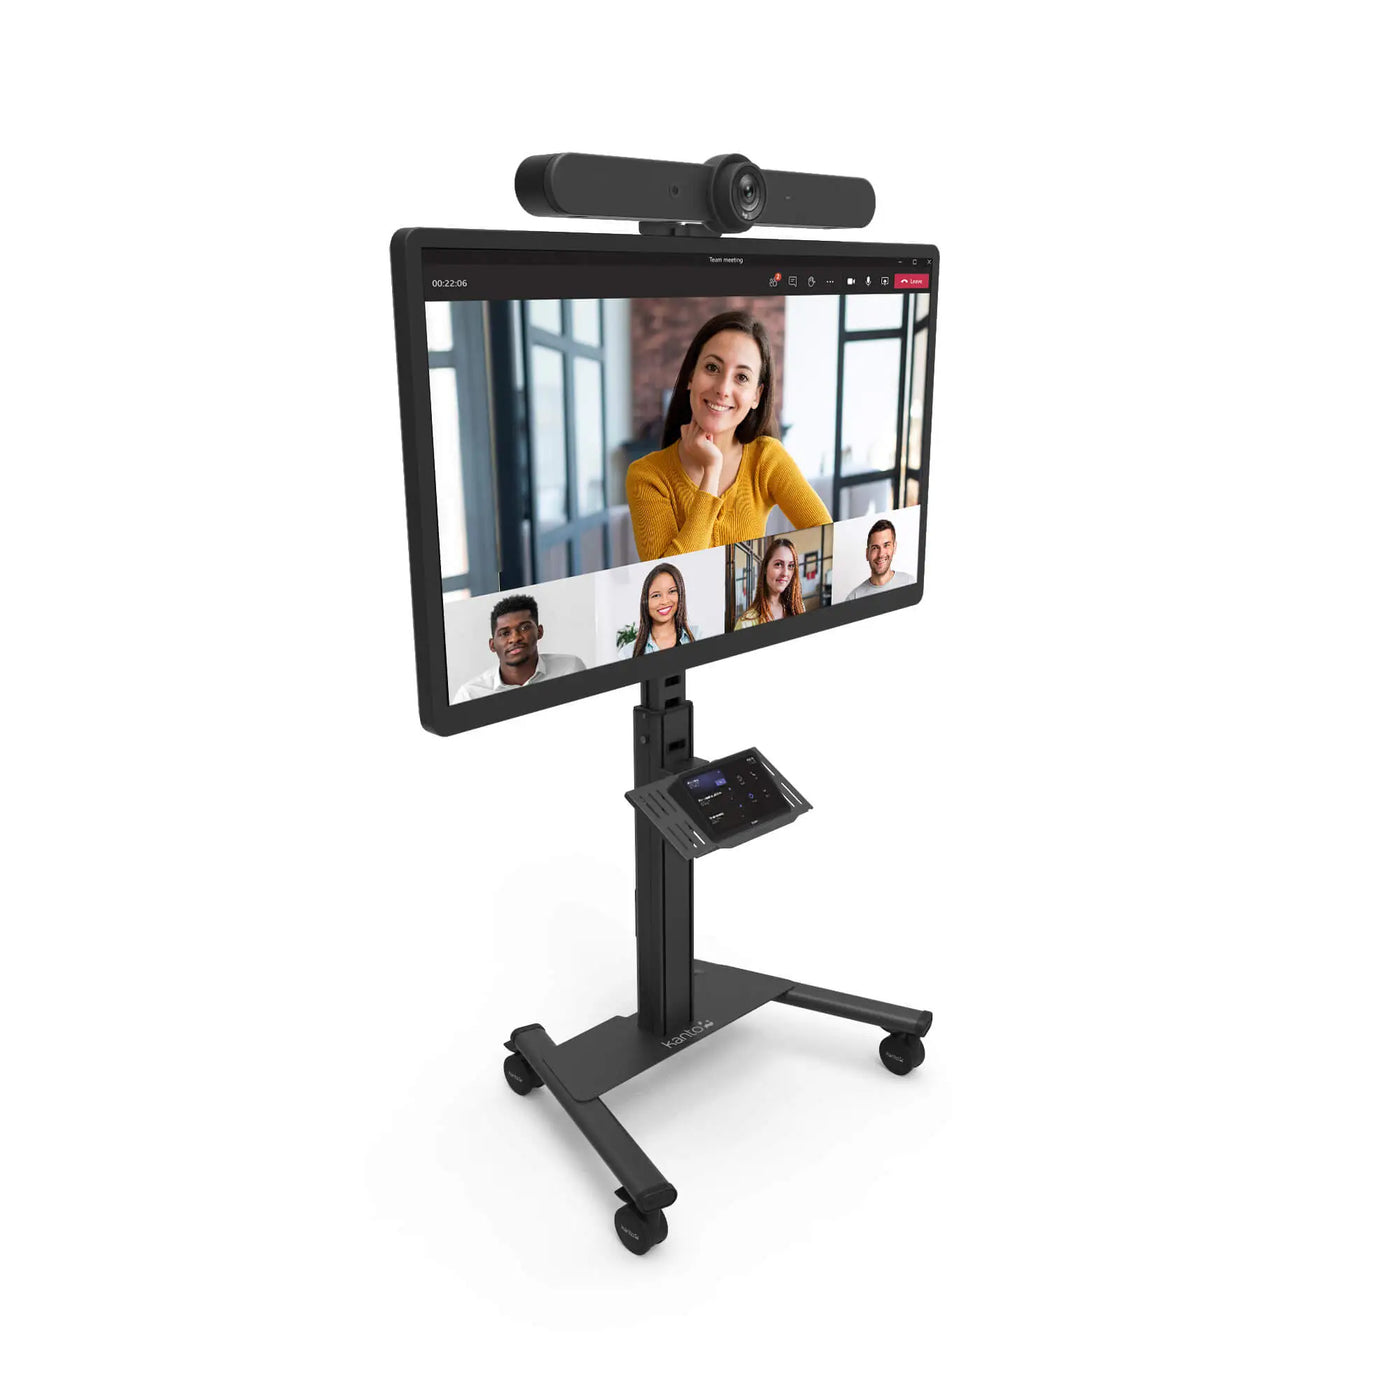 Kanto MPC77 Rolling AV Cart for All-in-One Video Conferencing Systems